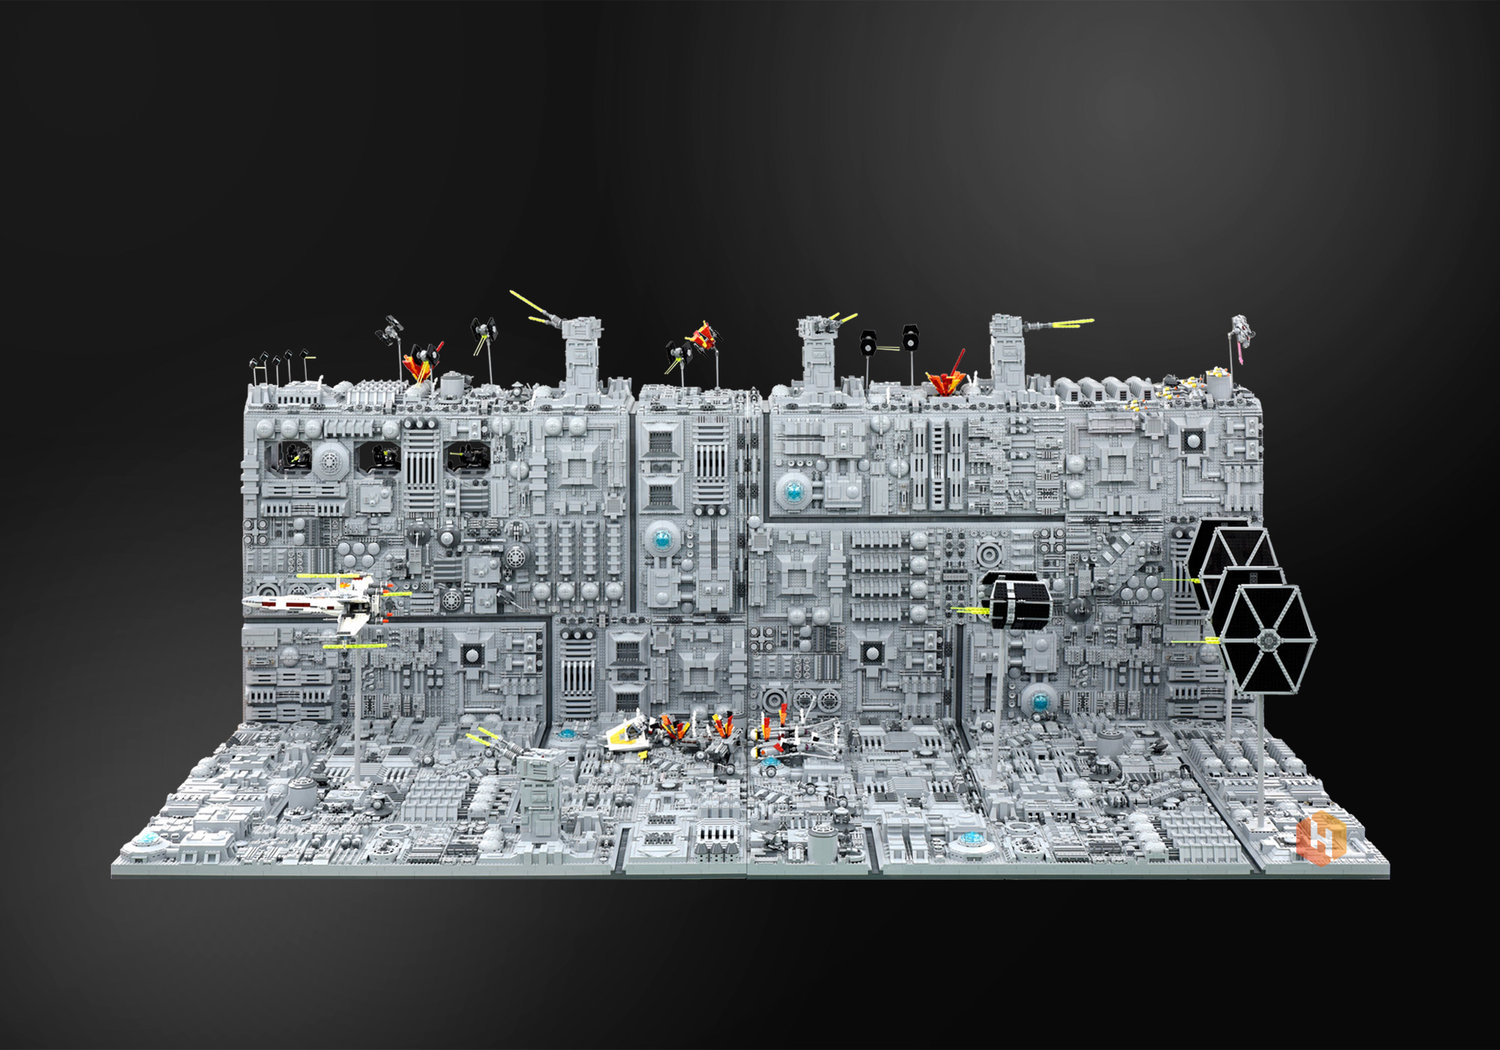 super-detailed-lego-diorama-of-the-star-wars-death-star-trench-run-stays-on-target2